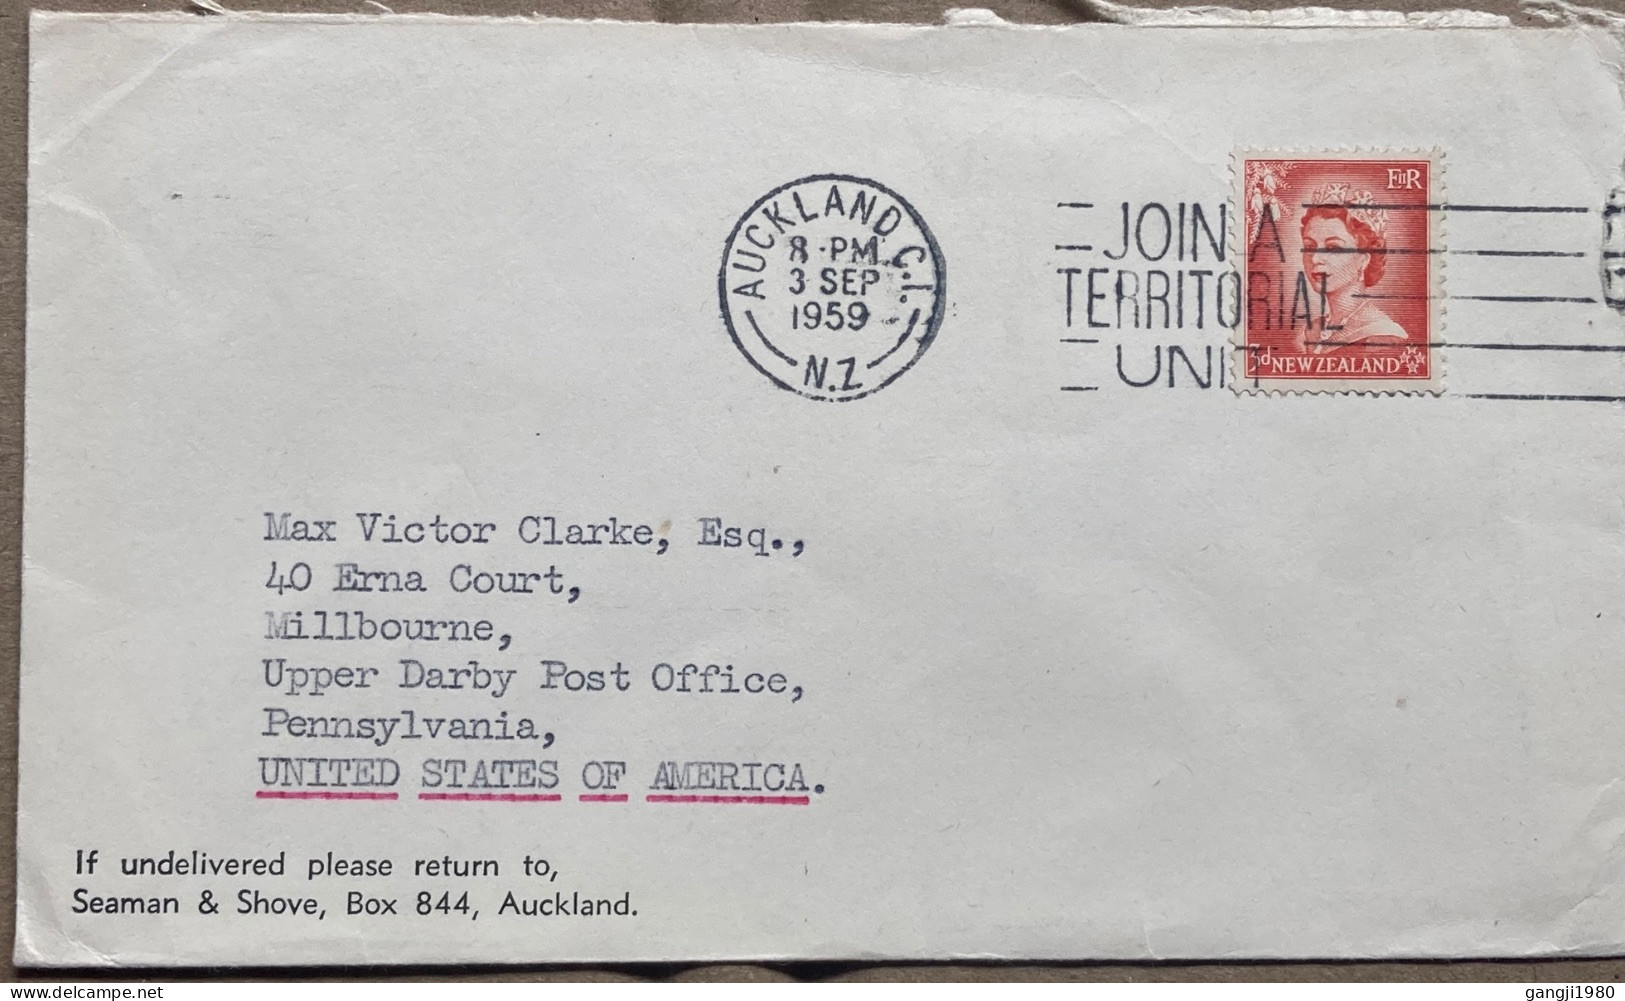 NEW ZEALAND 1959, COVER USED TO USA, FIRM SEAMAN & SHOVE, AUCKLAND CITY SLOGAN CANCEL, JOIN A TERRITORIAL UNIT, QUEEN ST - Brieven En Documenten